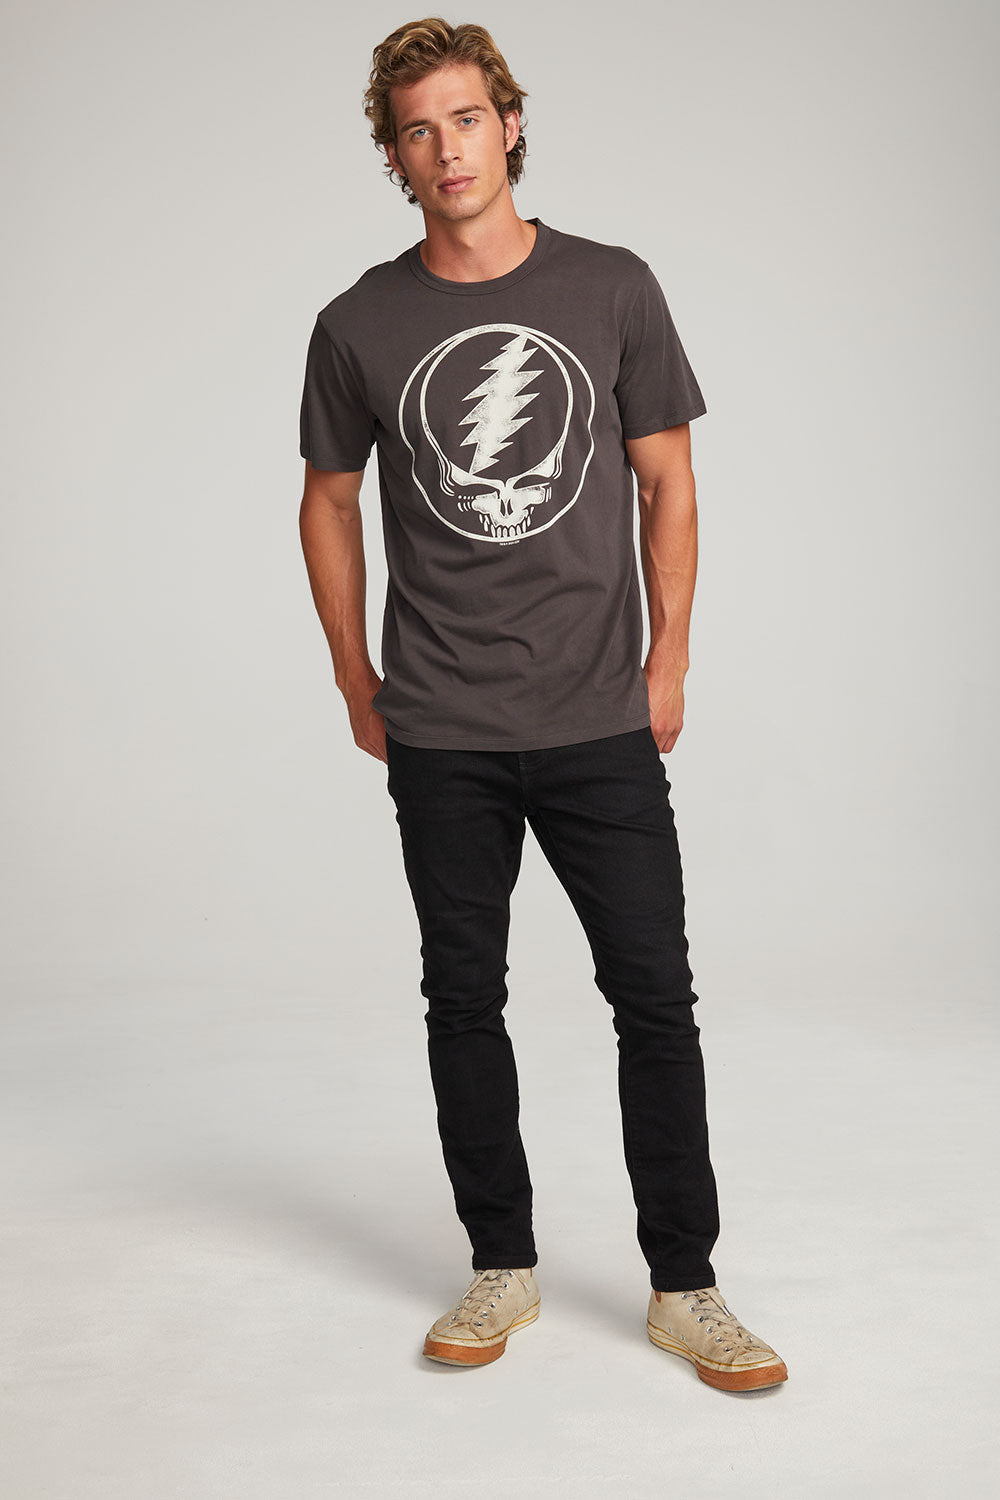 Grateful Dead Steal Your Face Mens Tee MENS chaserbrand